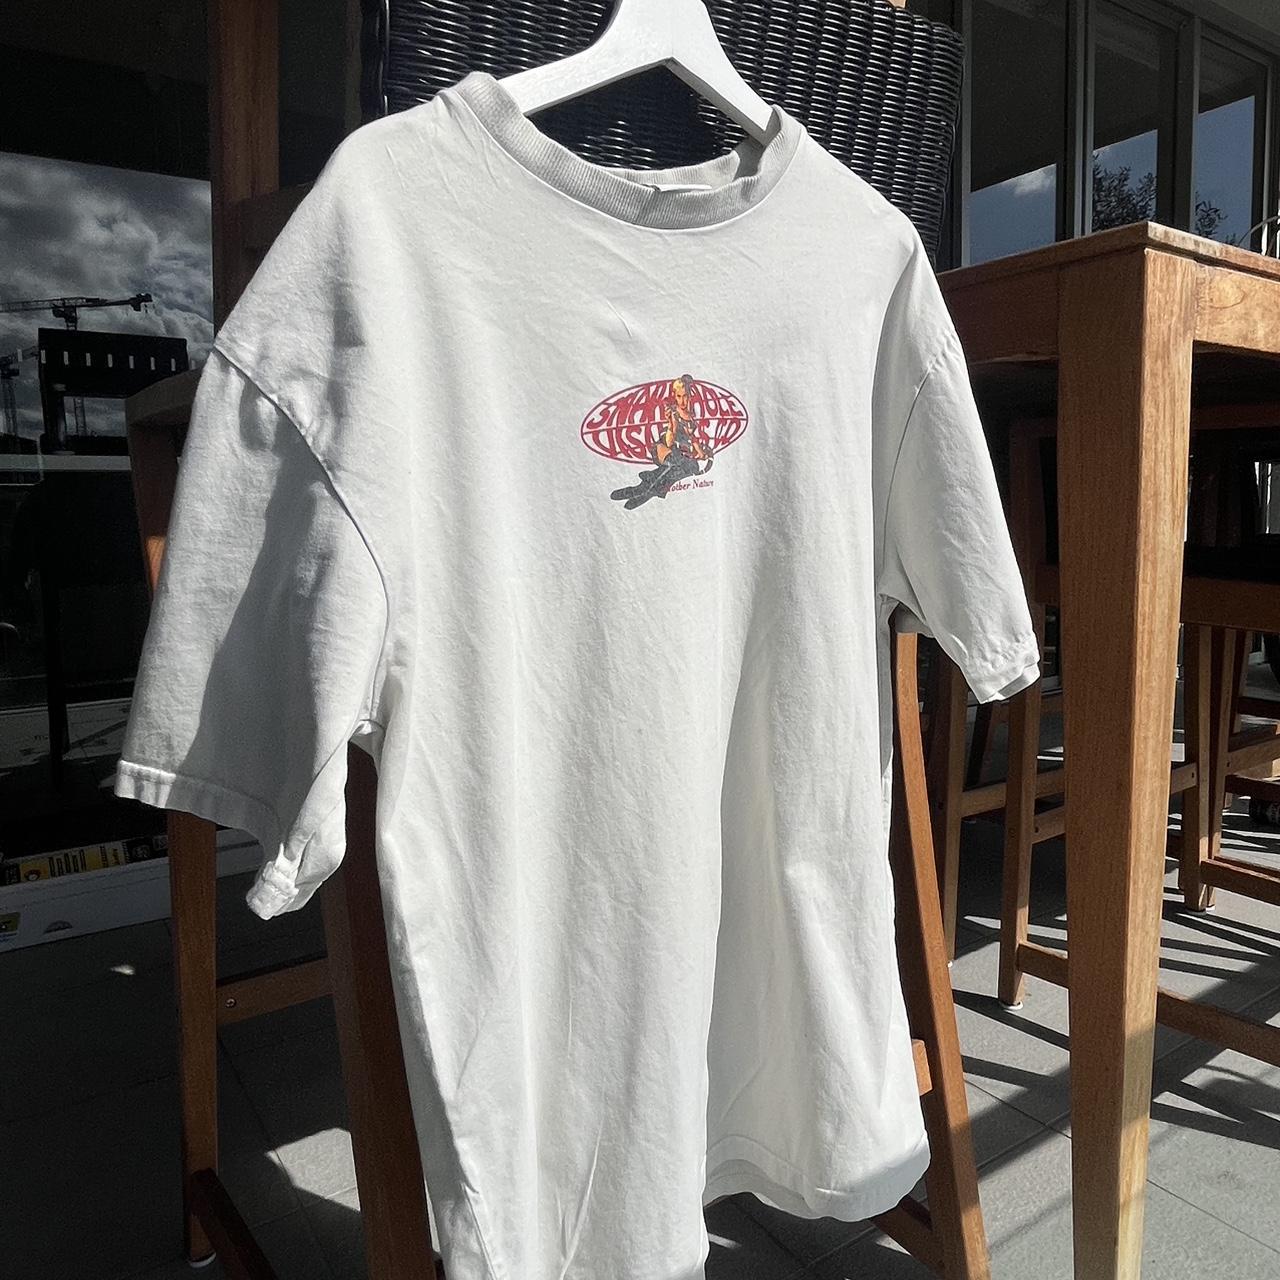 White T with graphic - Depop